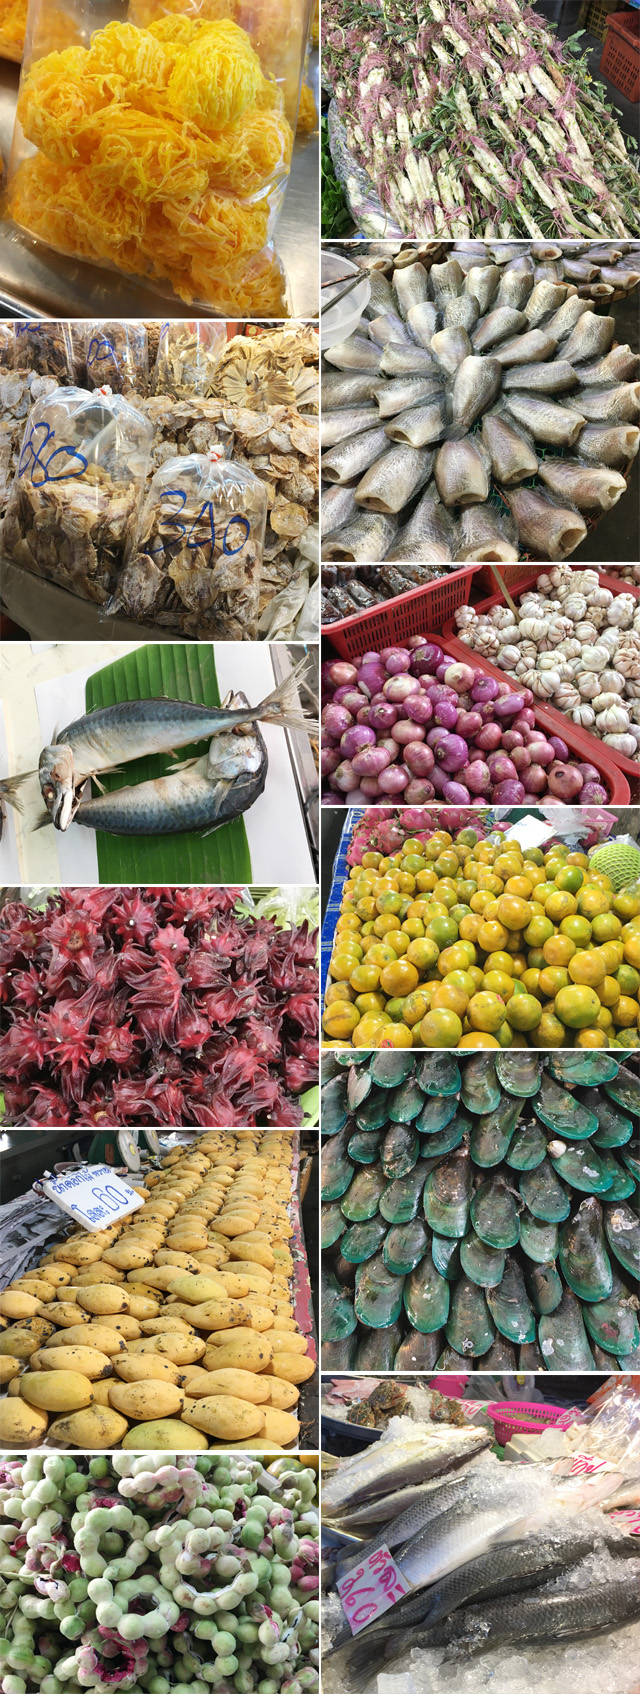 Several photos of fruits, seafood, meat, vegetables, an dried foods